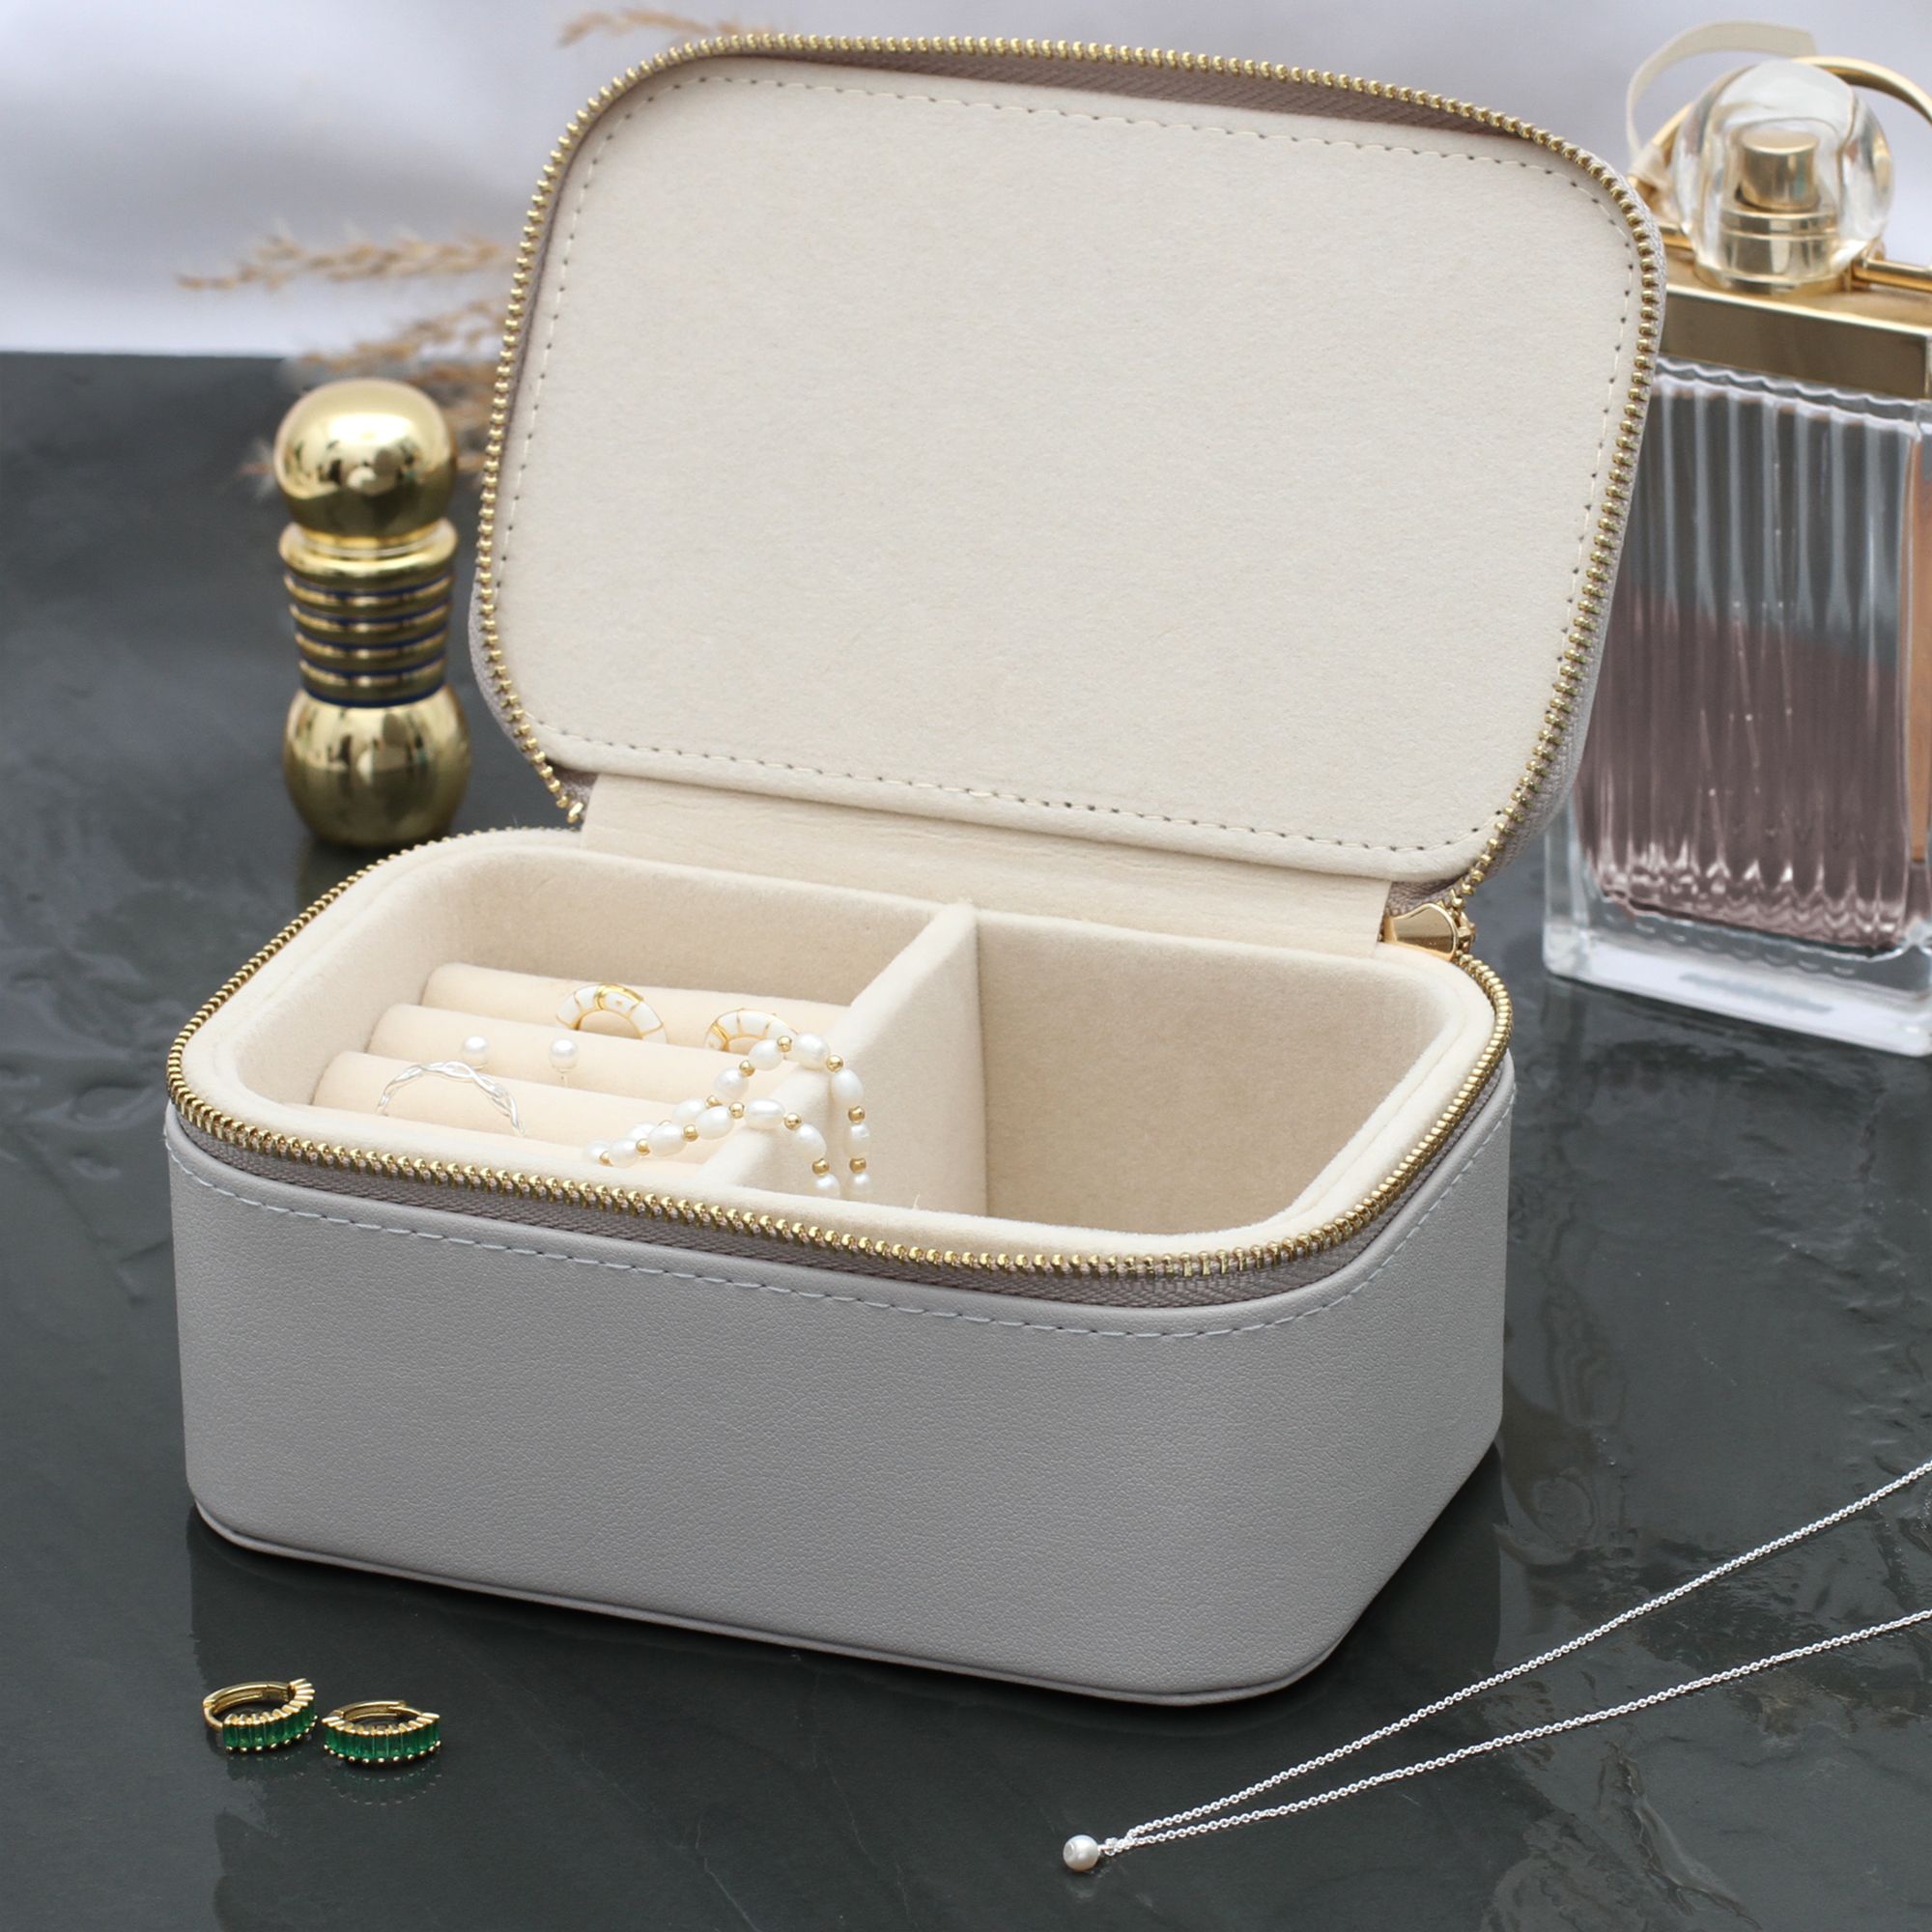 Leather Jewelry Box Designs for Organizing Your Accessories插图4